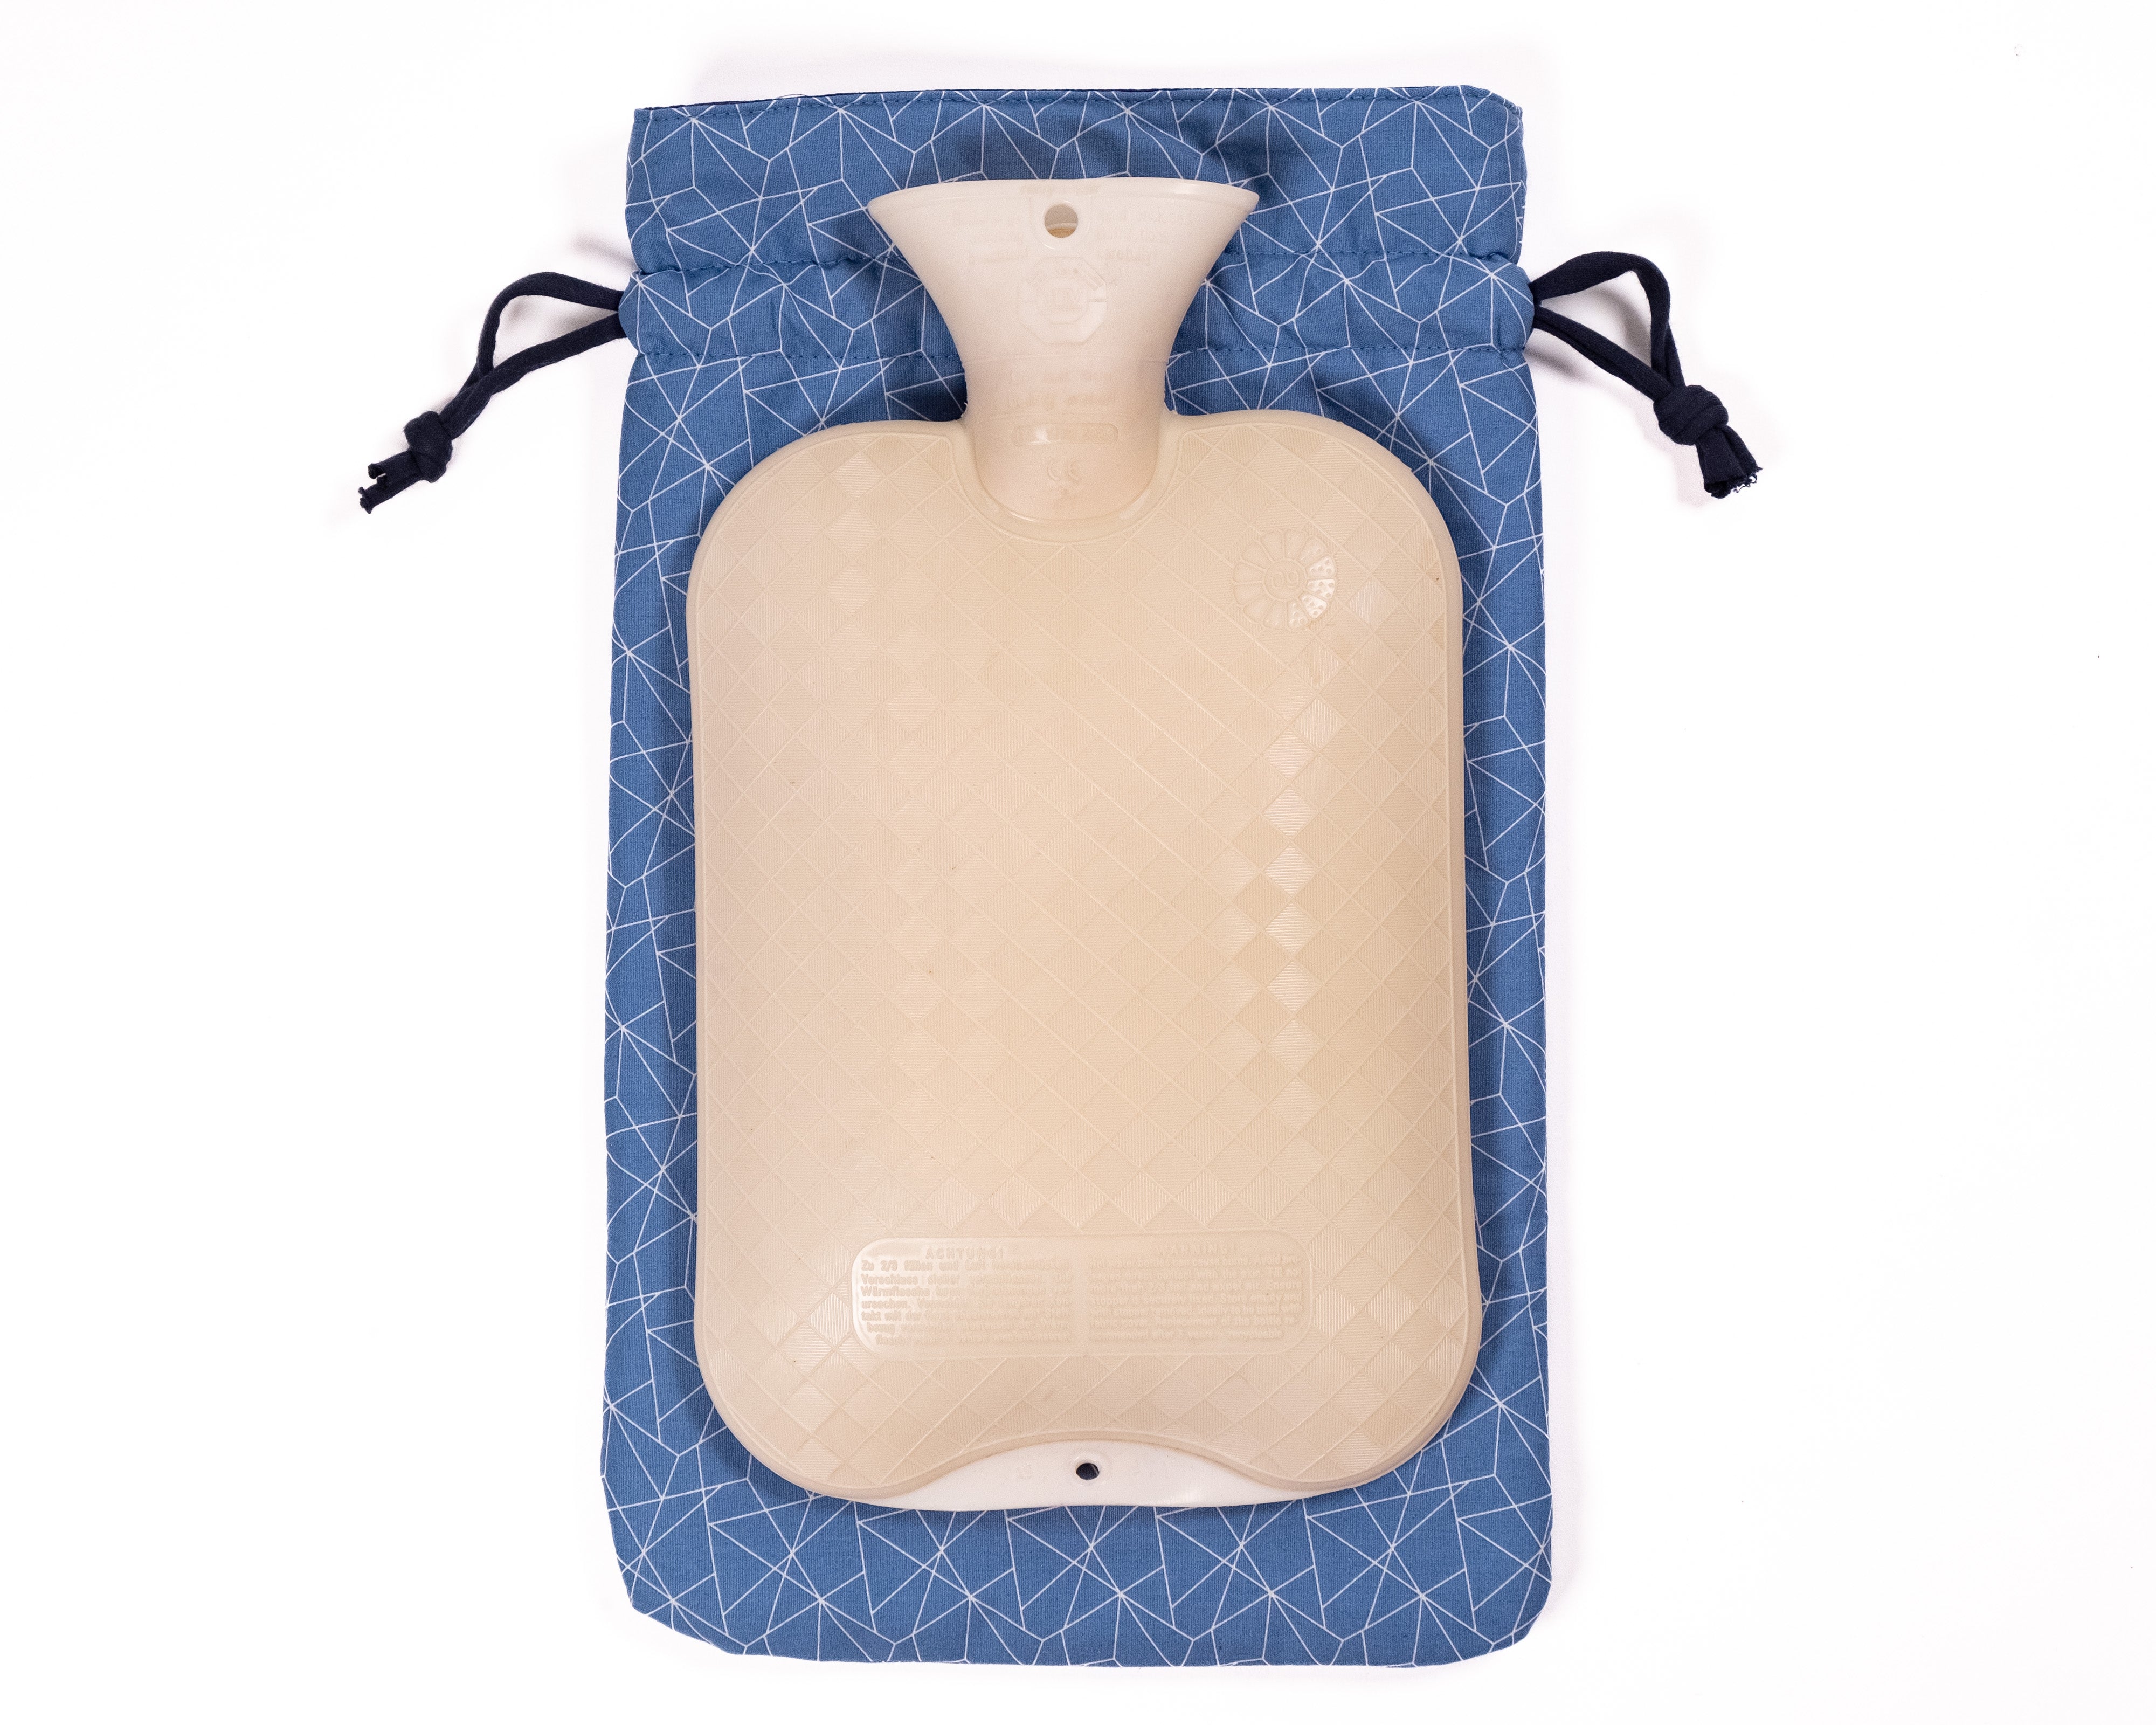 Hot water bottle cover - W001